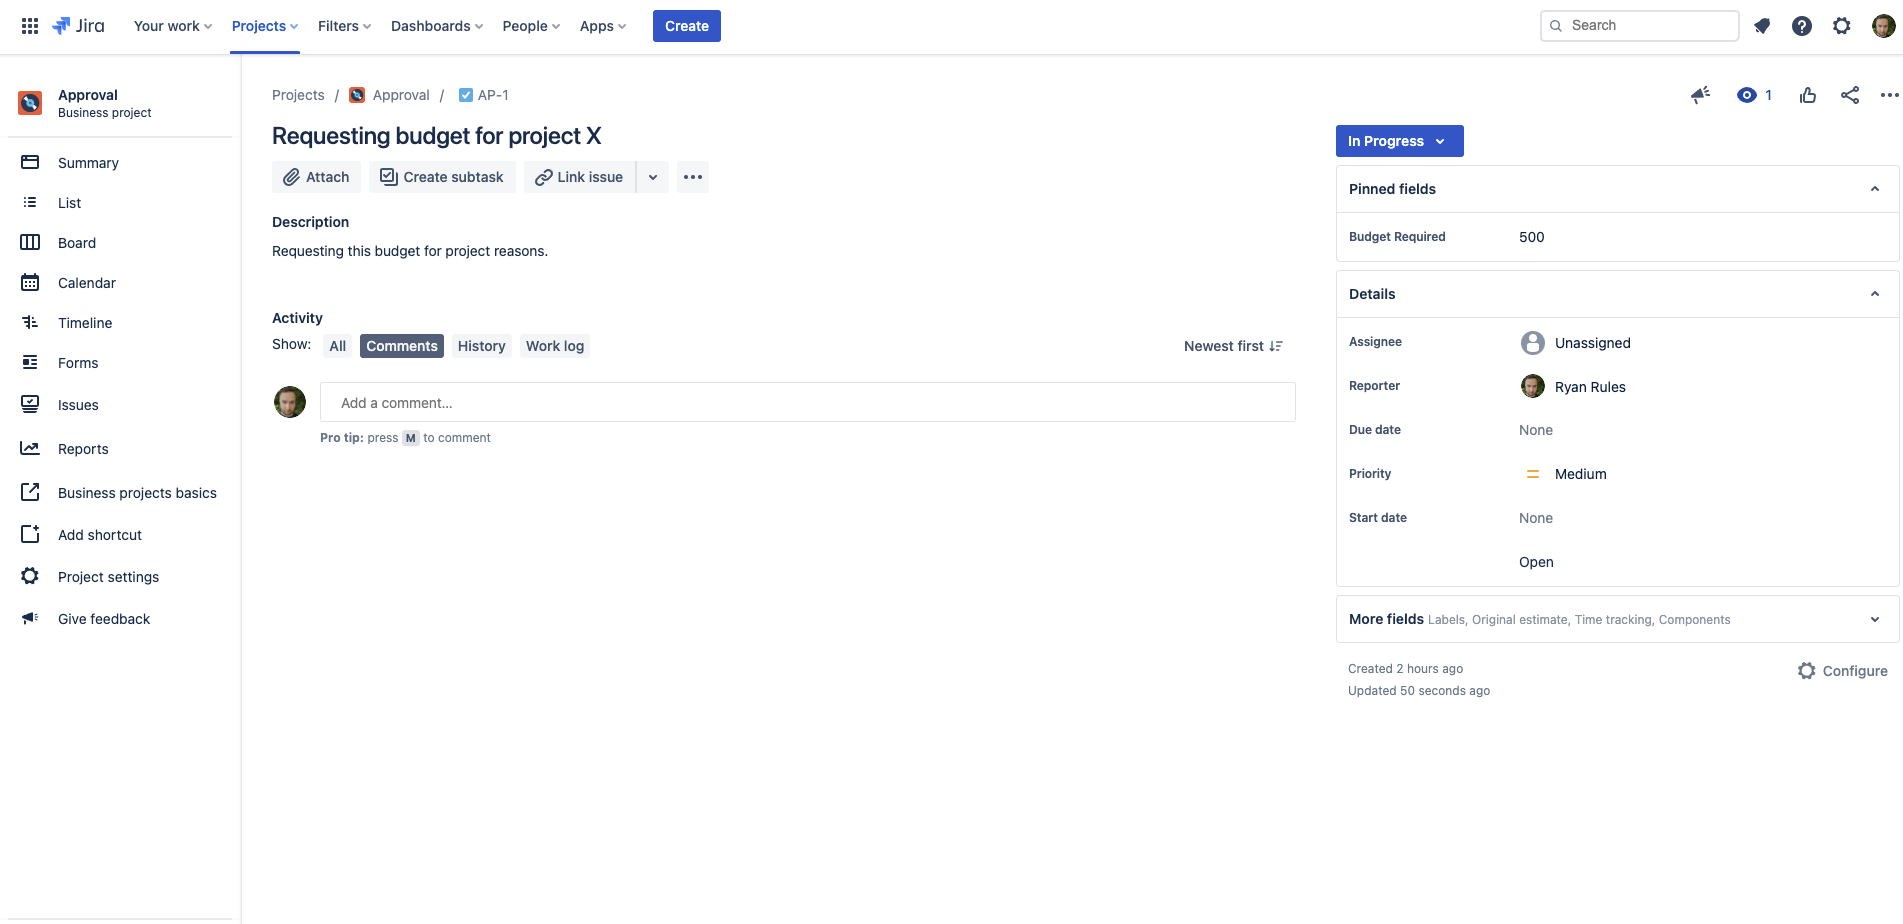 Sample Jira issue with budget required field value of 500